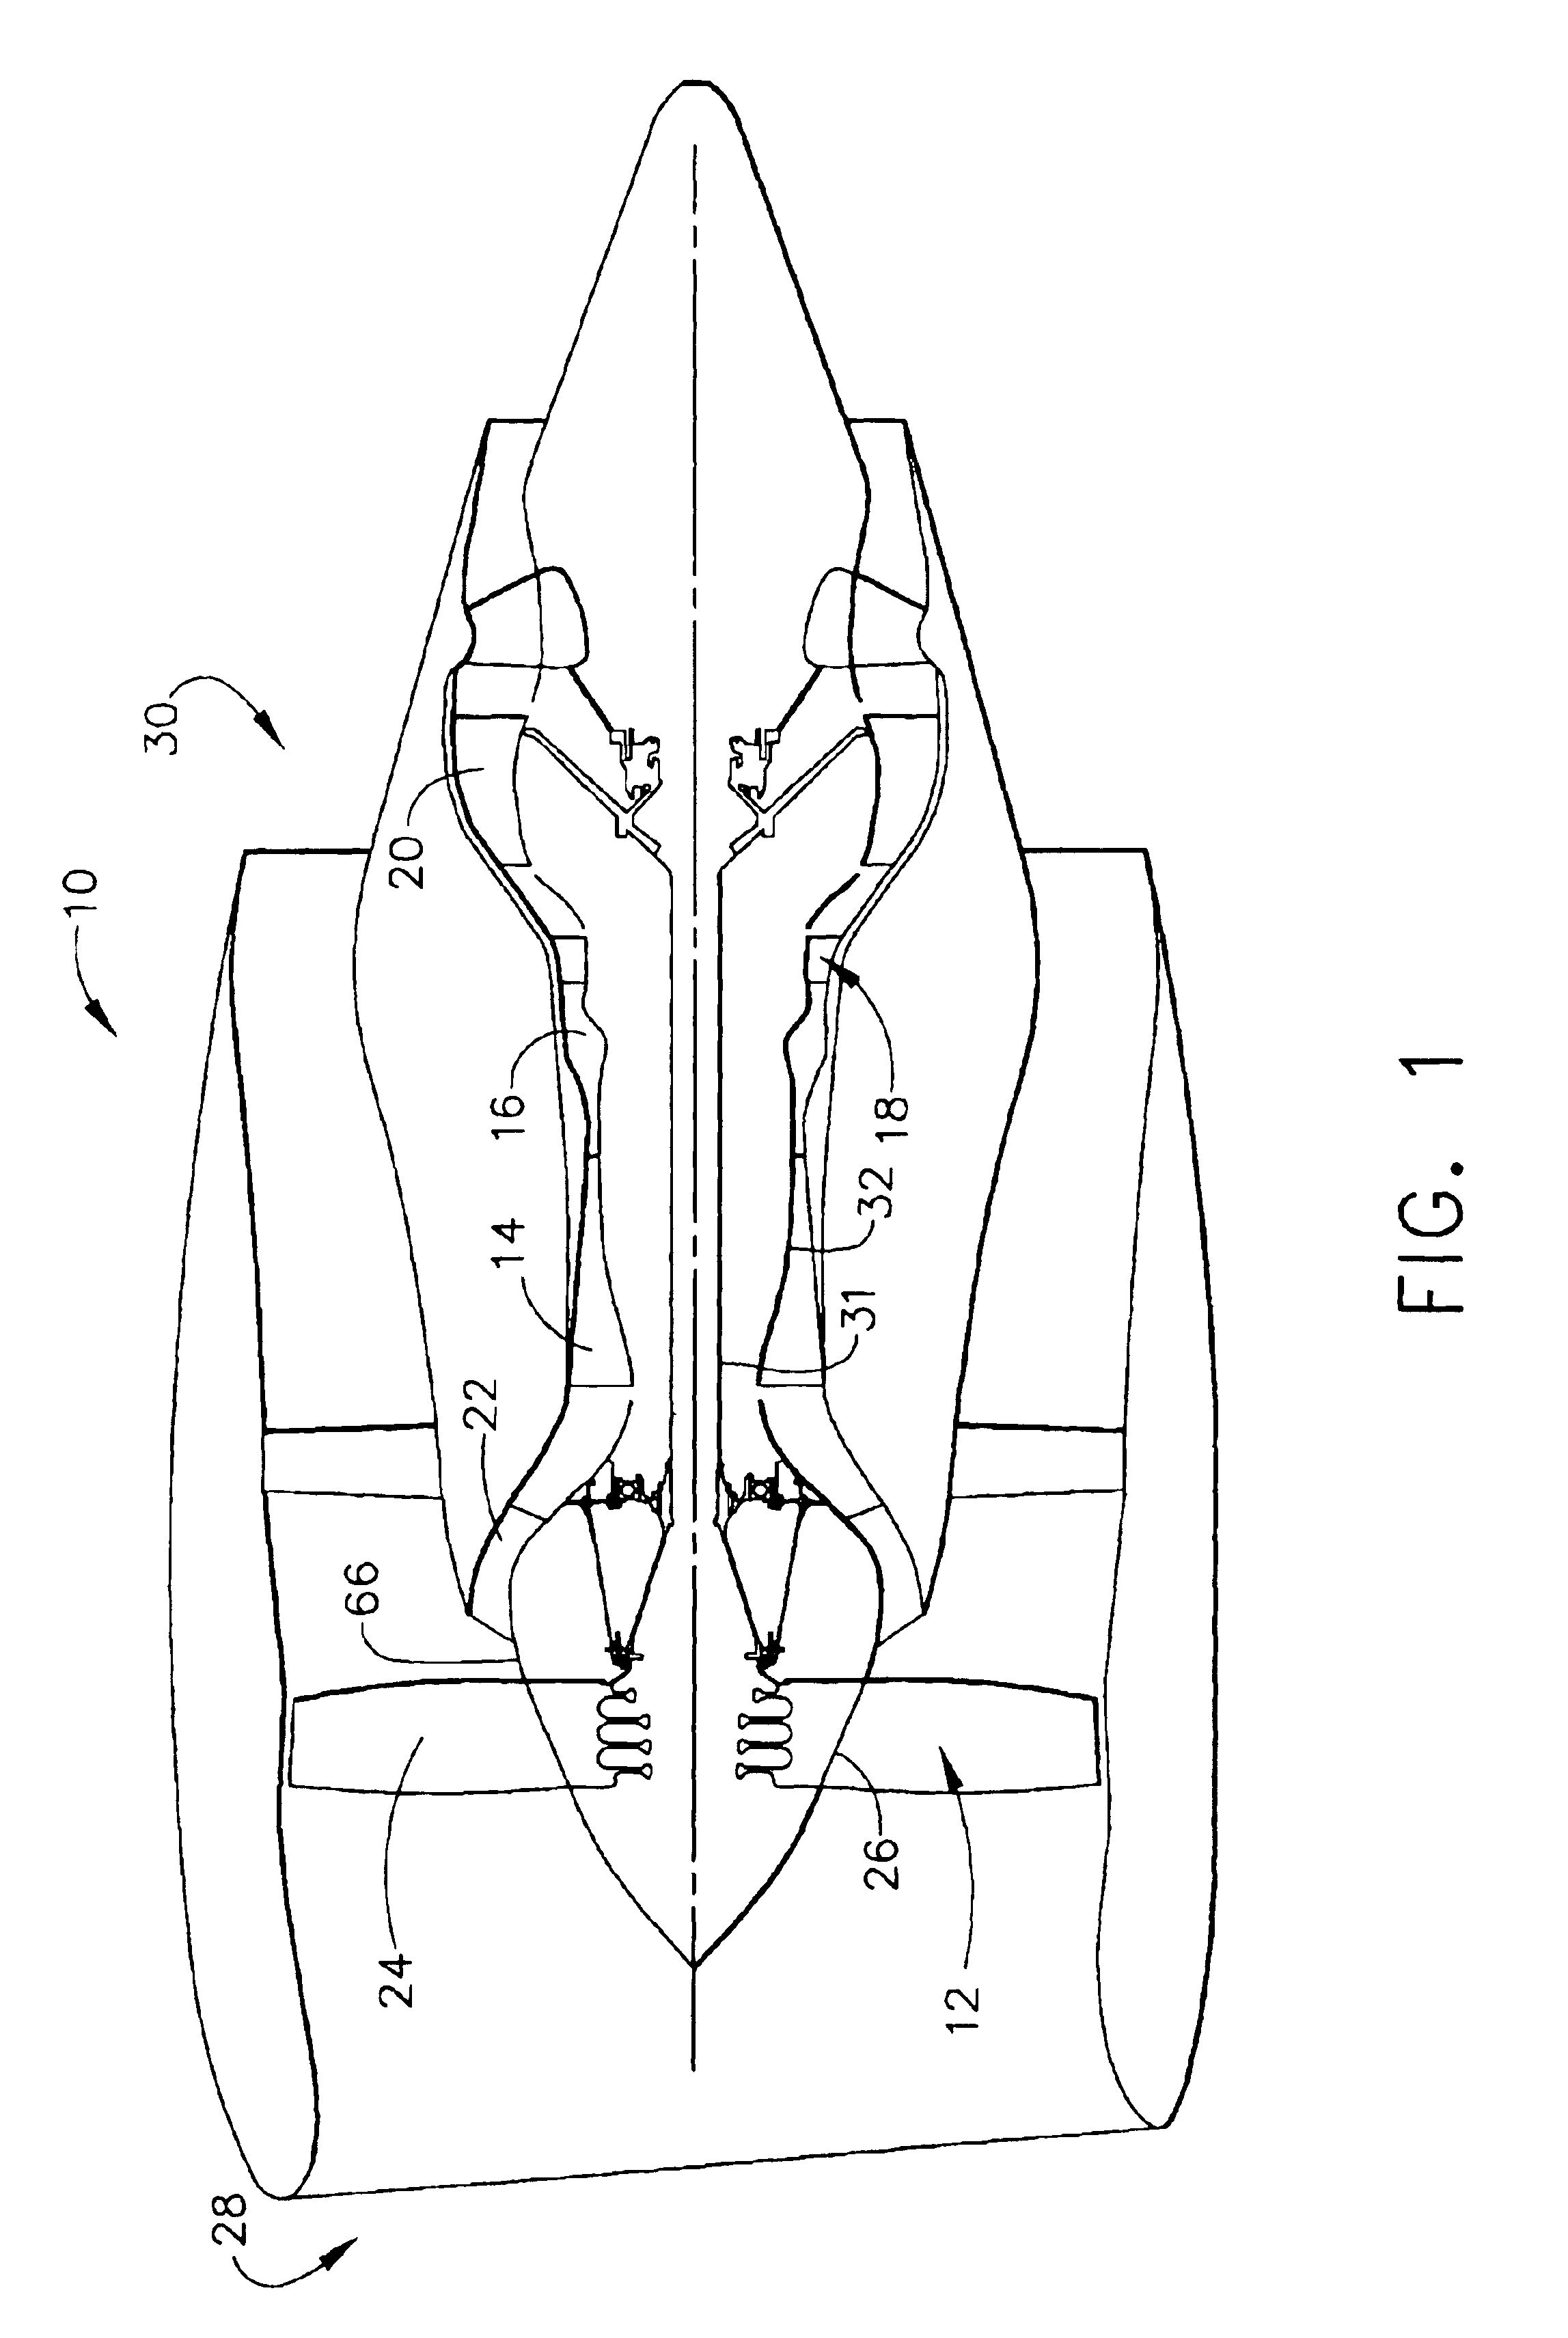 Methods and apparatus for operating gas turbine engines